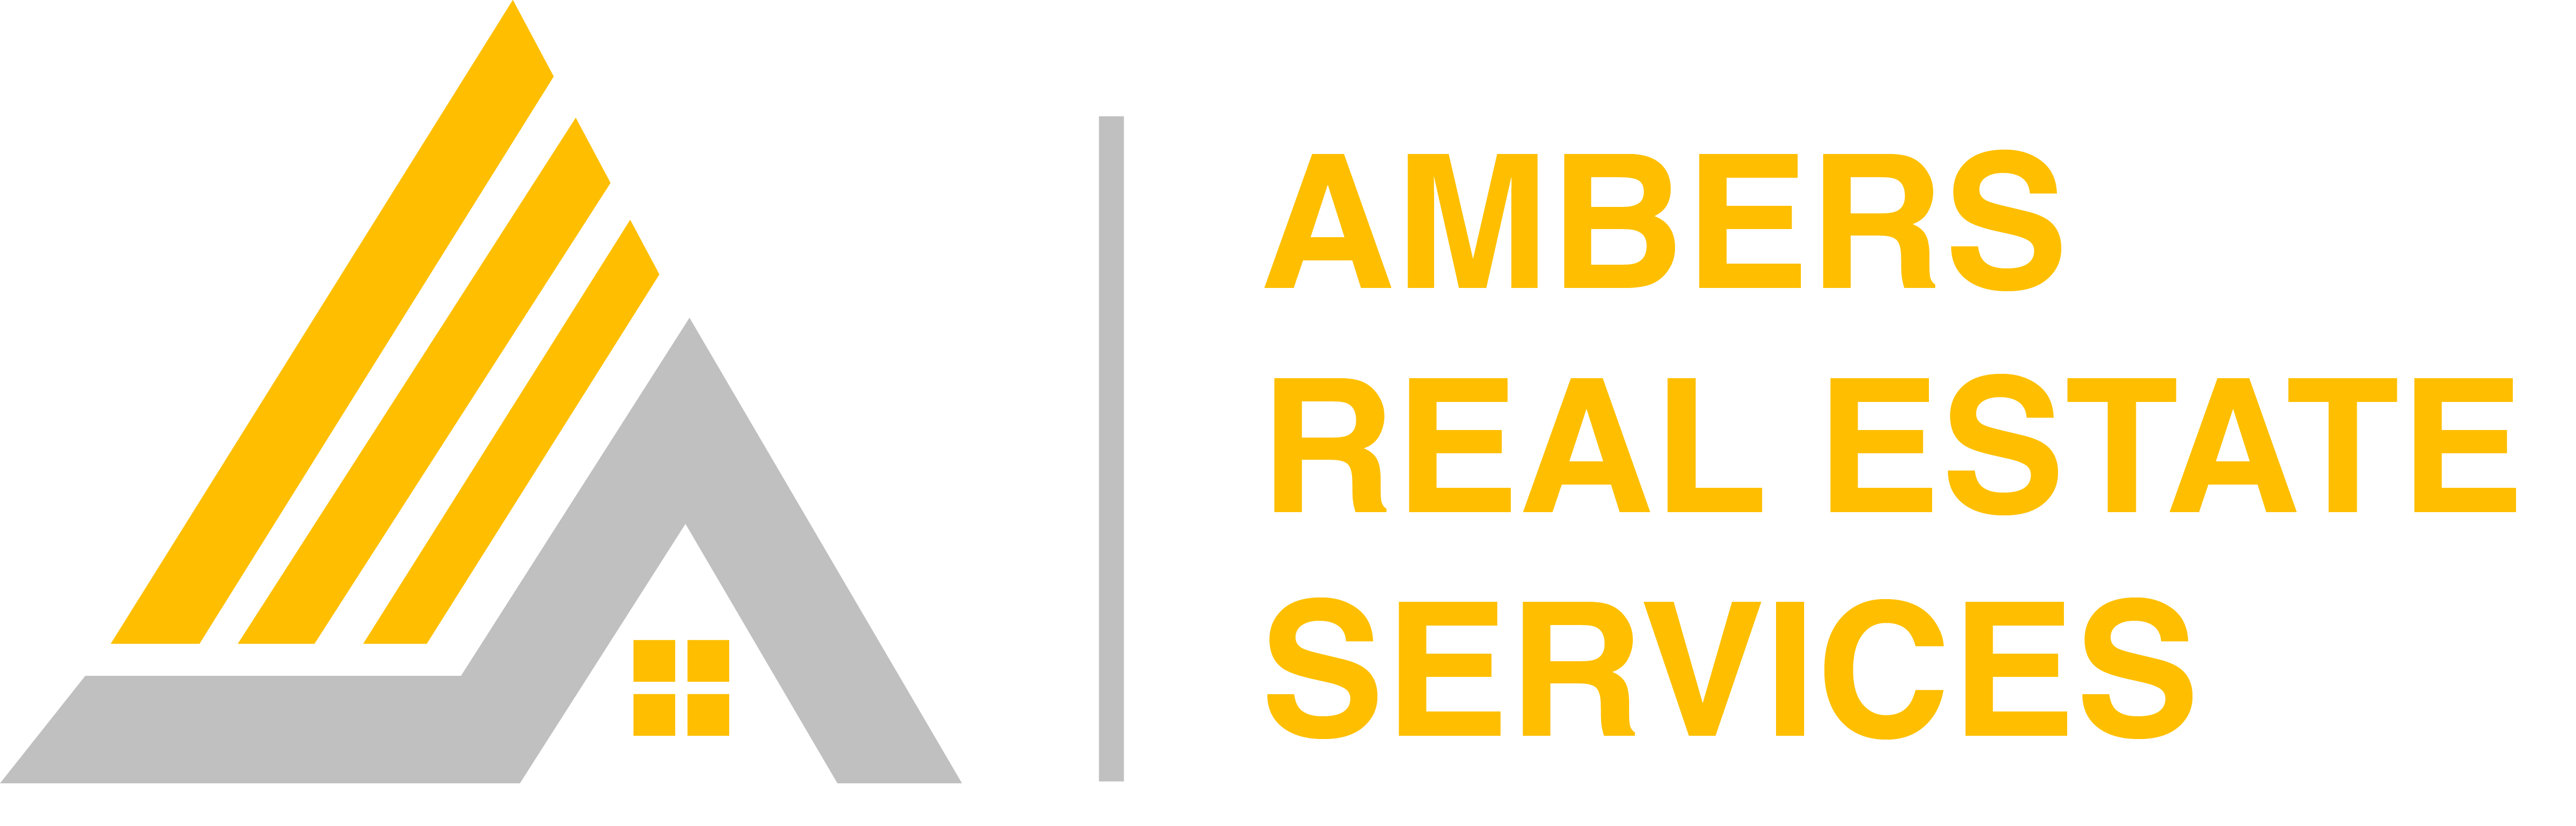 Ambers Real Estate Services